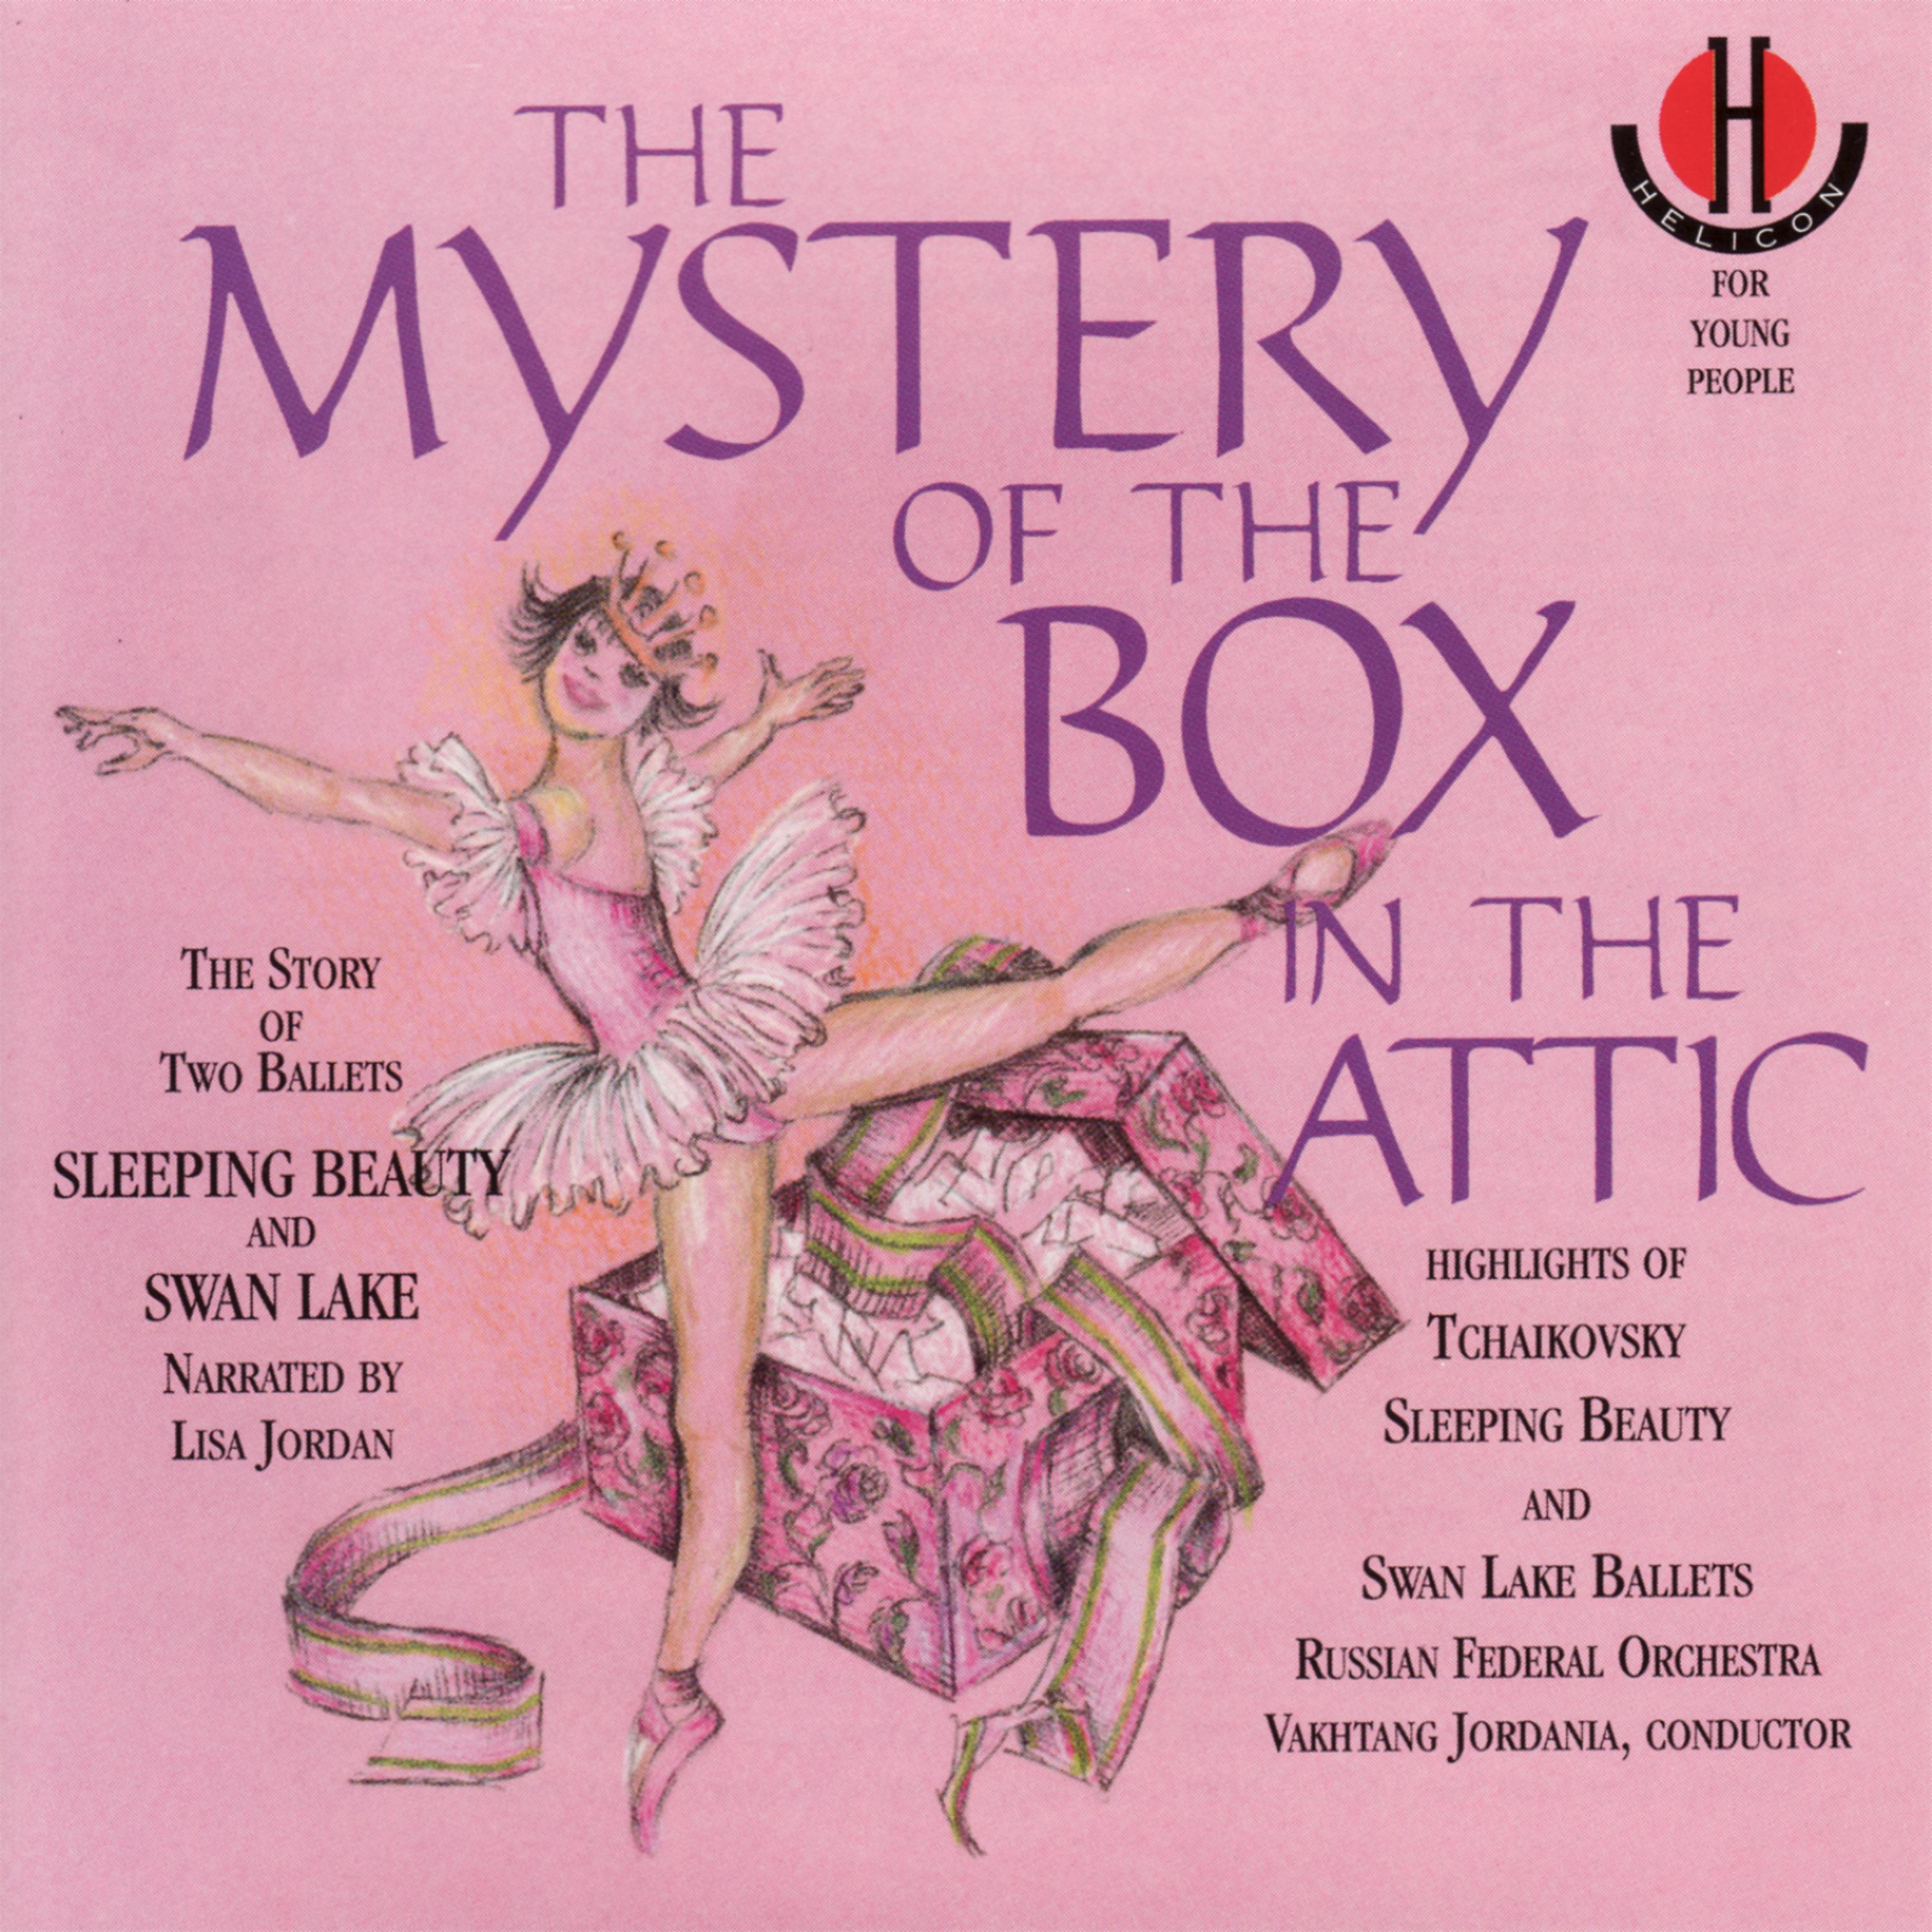 Постер альбома Tchaikovsky: The Mystery of the Box in the Attic - Highlights of Sleeping Beauty and Swan Lake Ballets